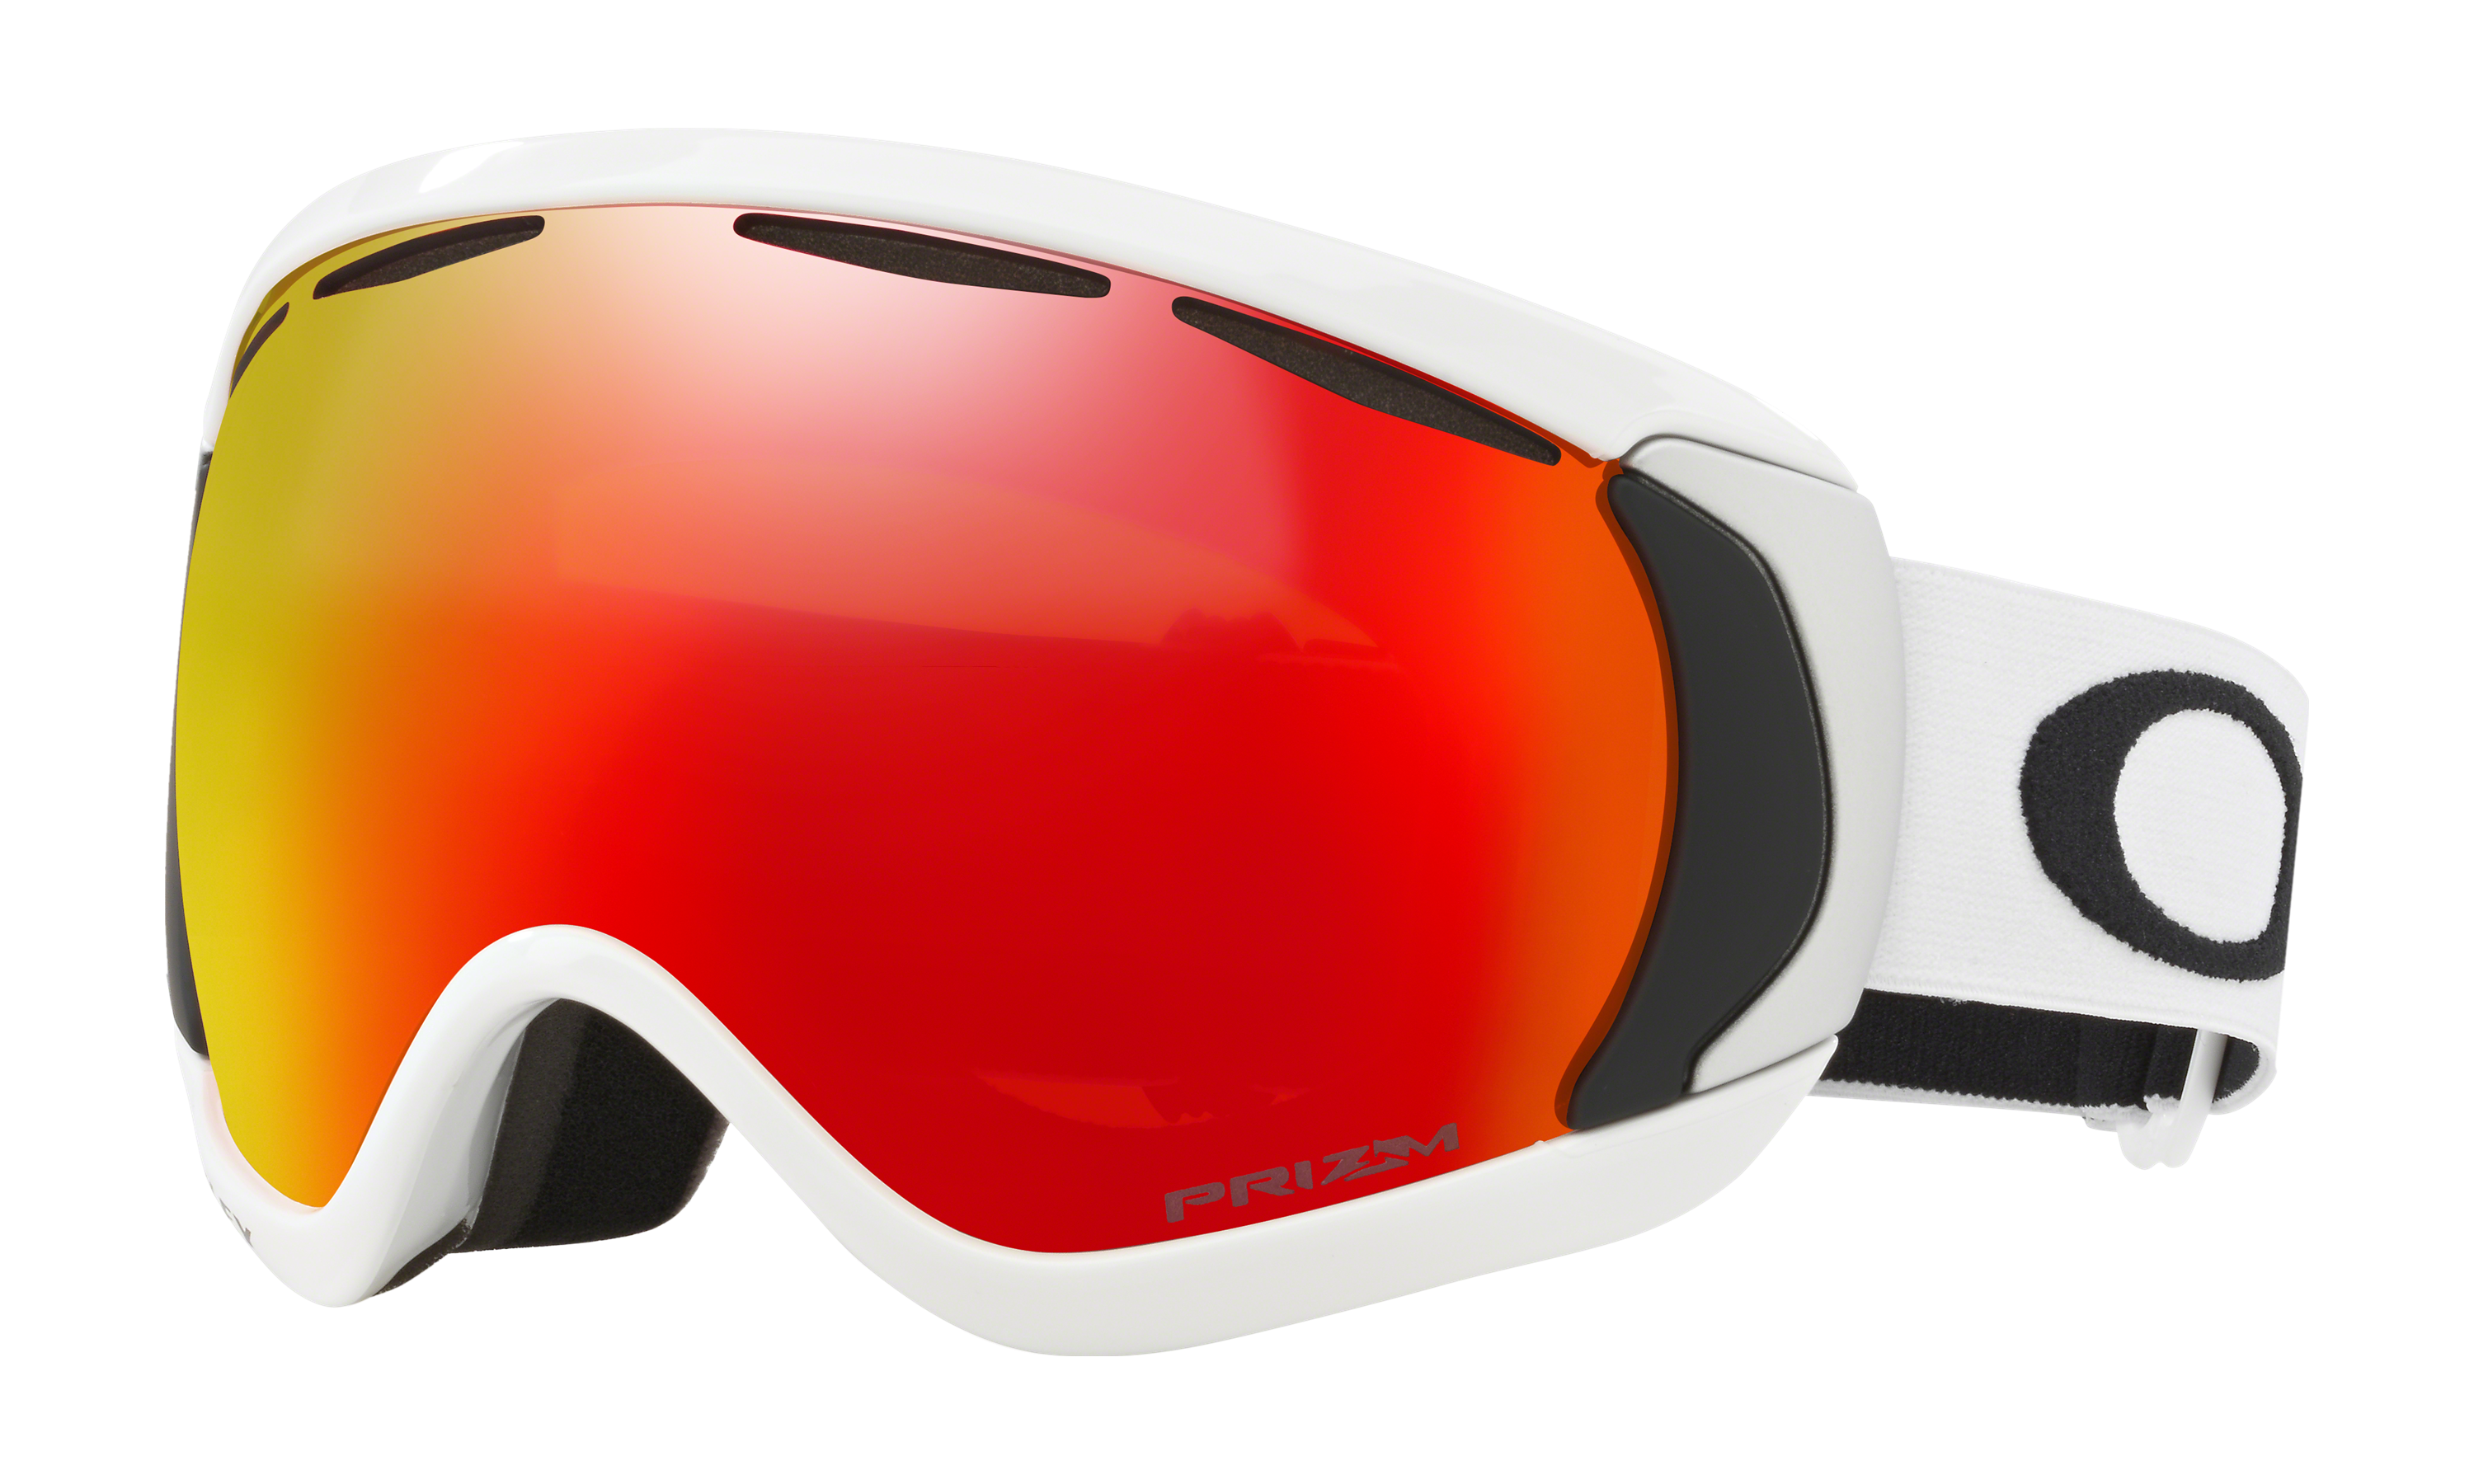 oakley canopy asian fit goggles